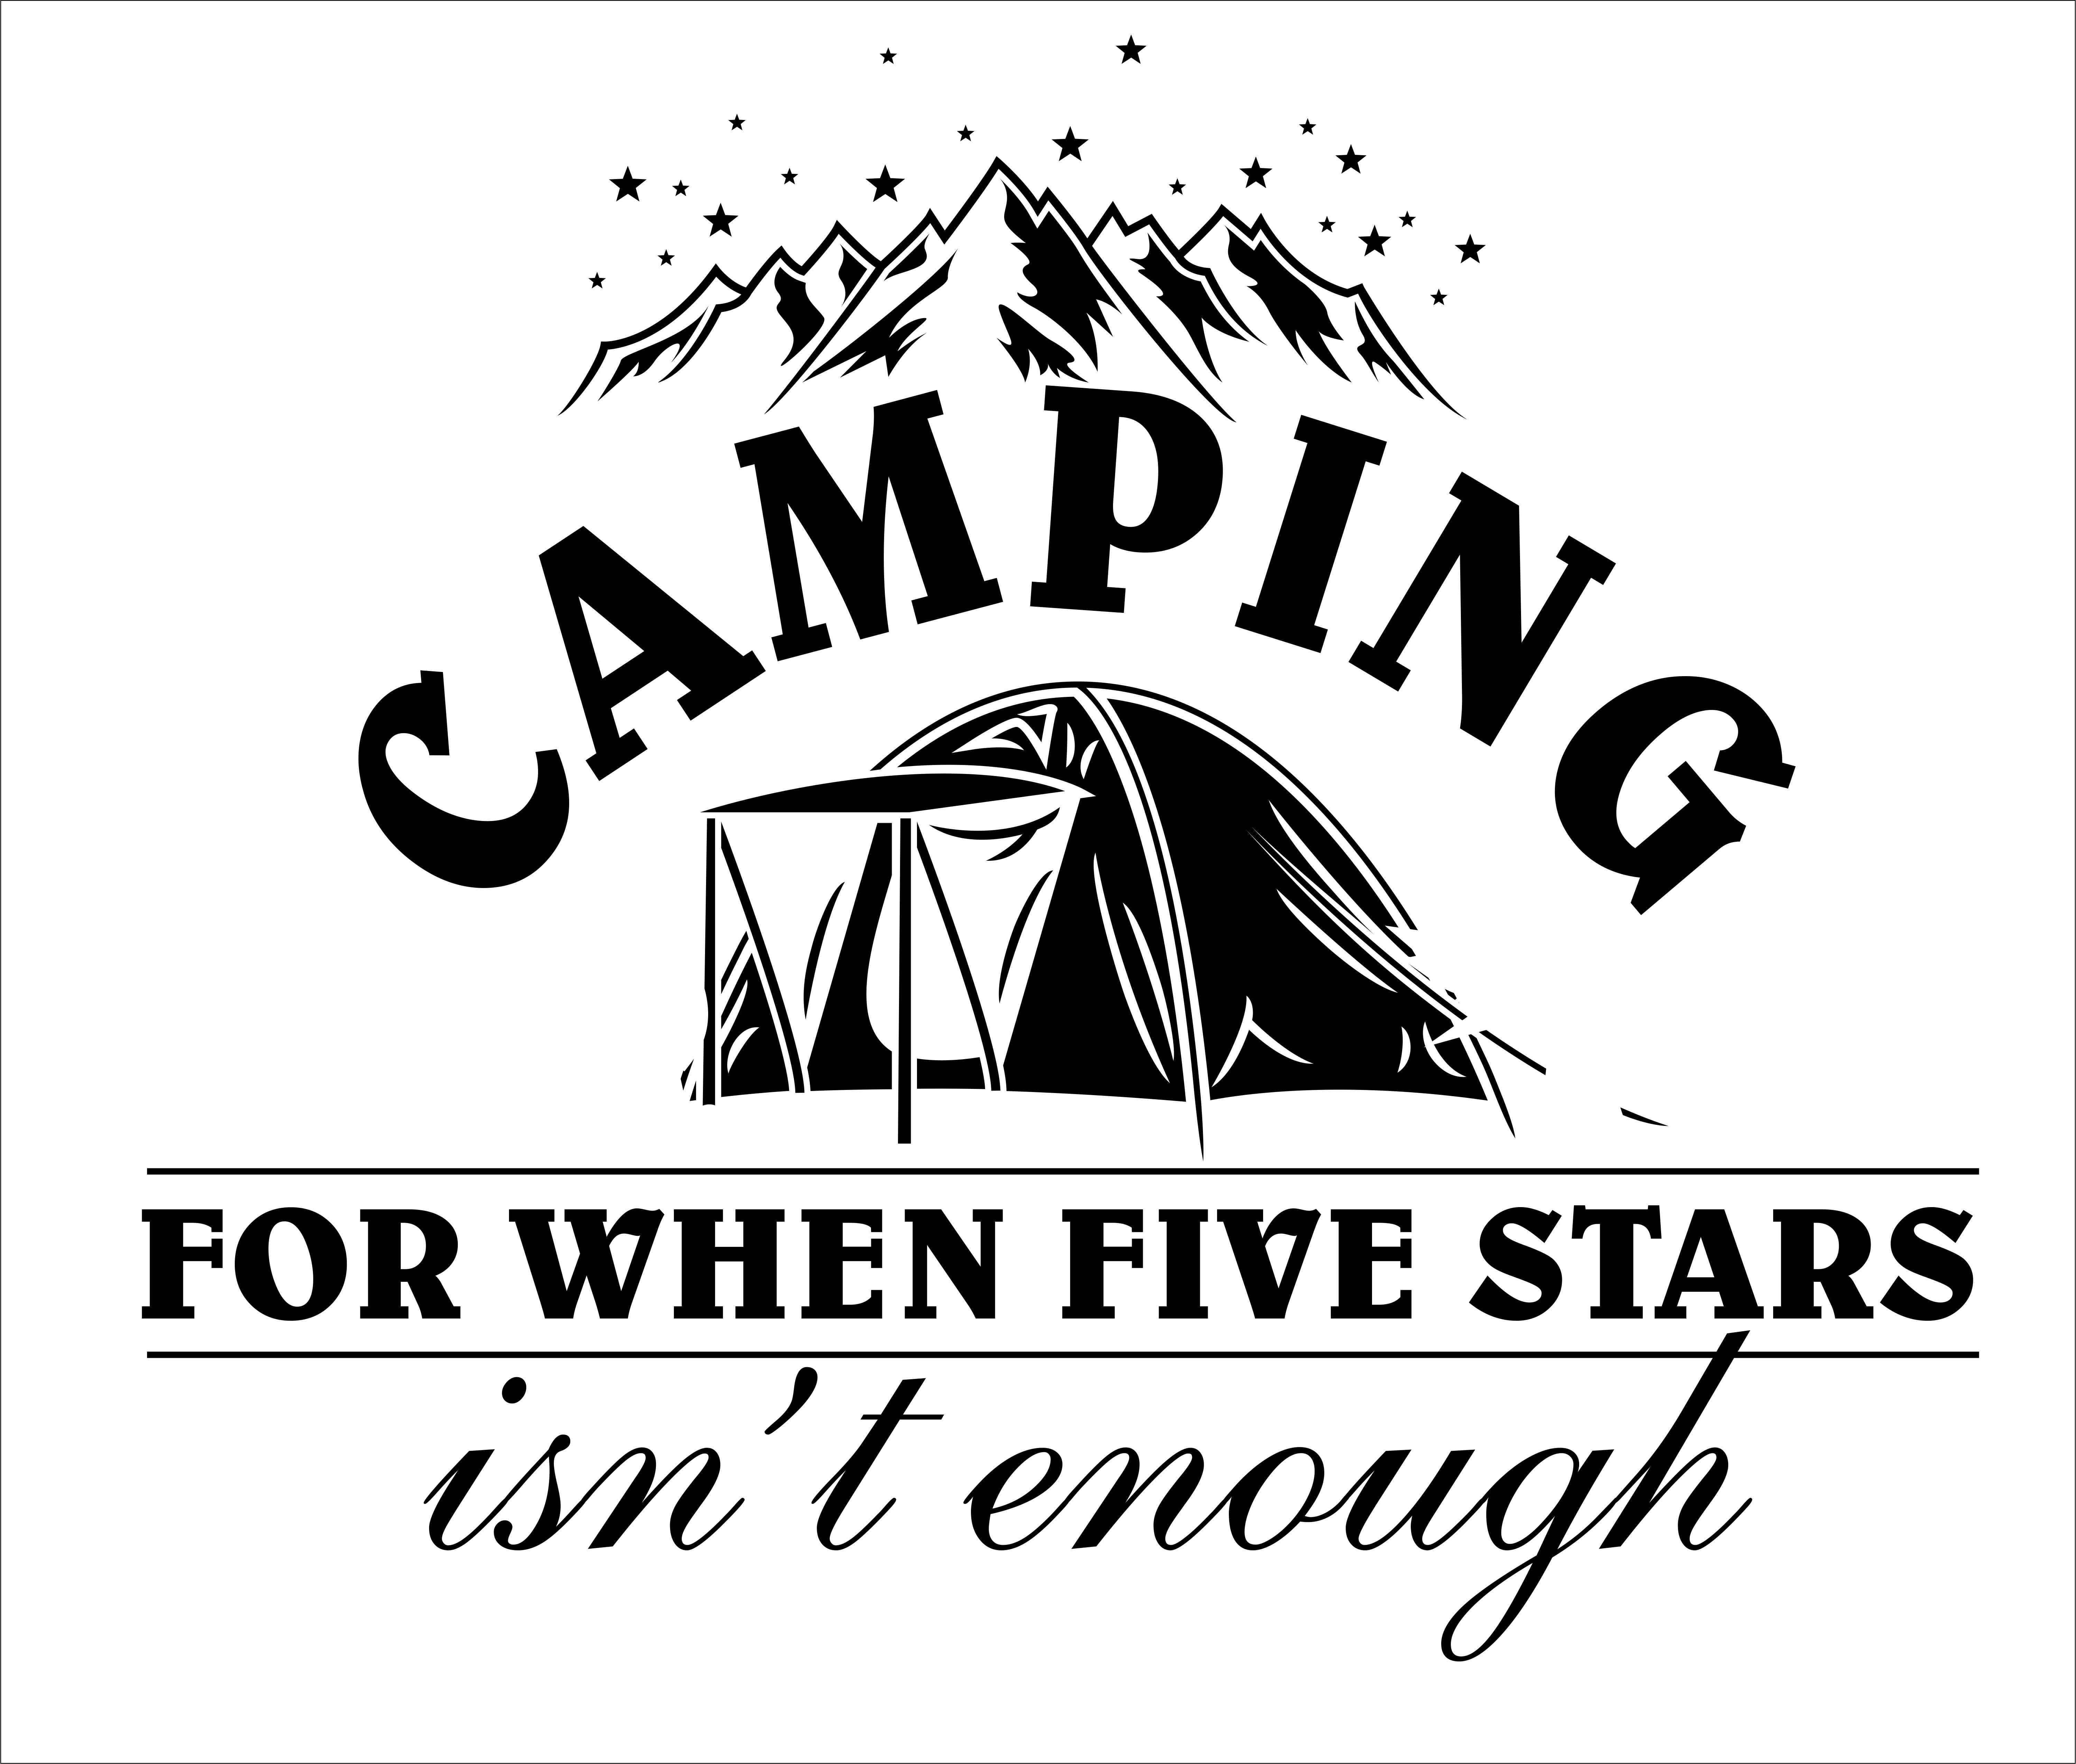 Details about   Vinyl Wall Decal Camping Happy Camper Travel Interior Tent Stickers g5405